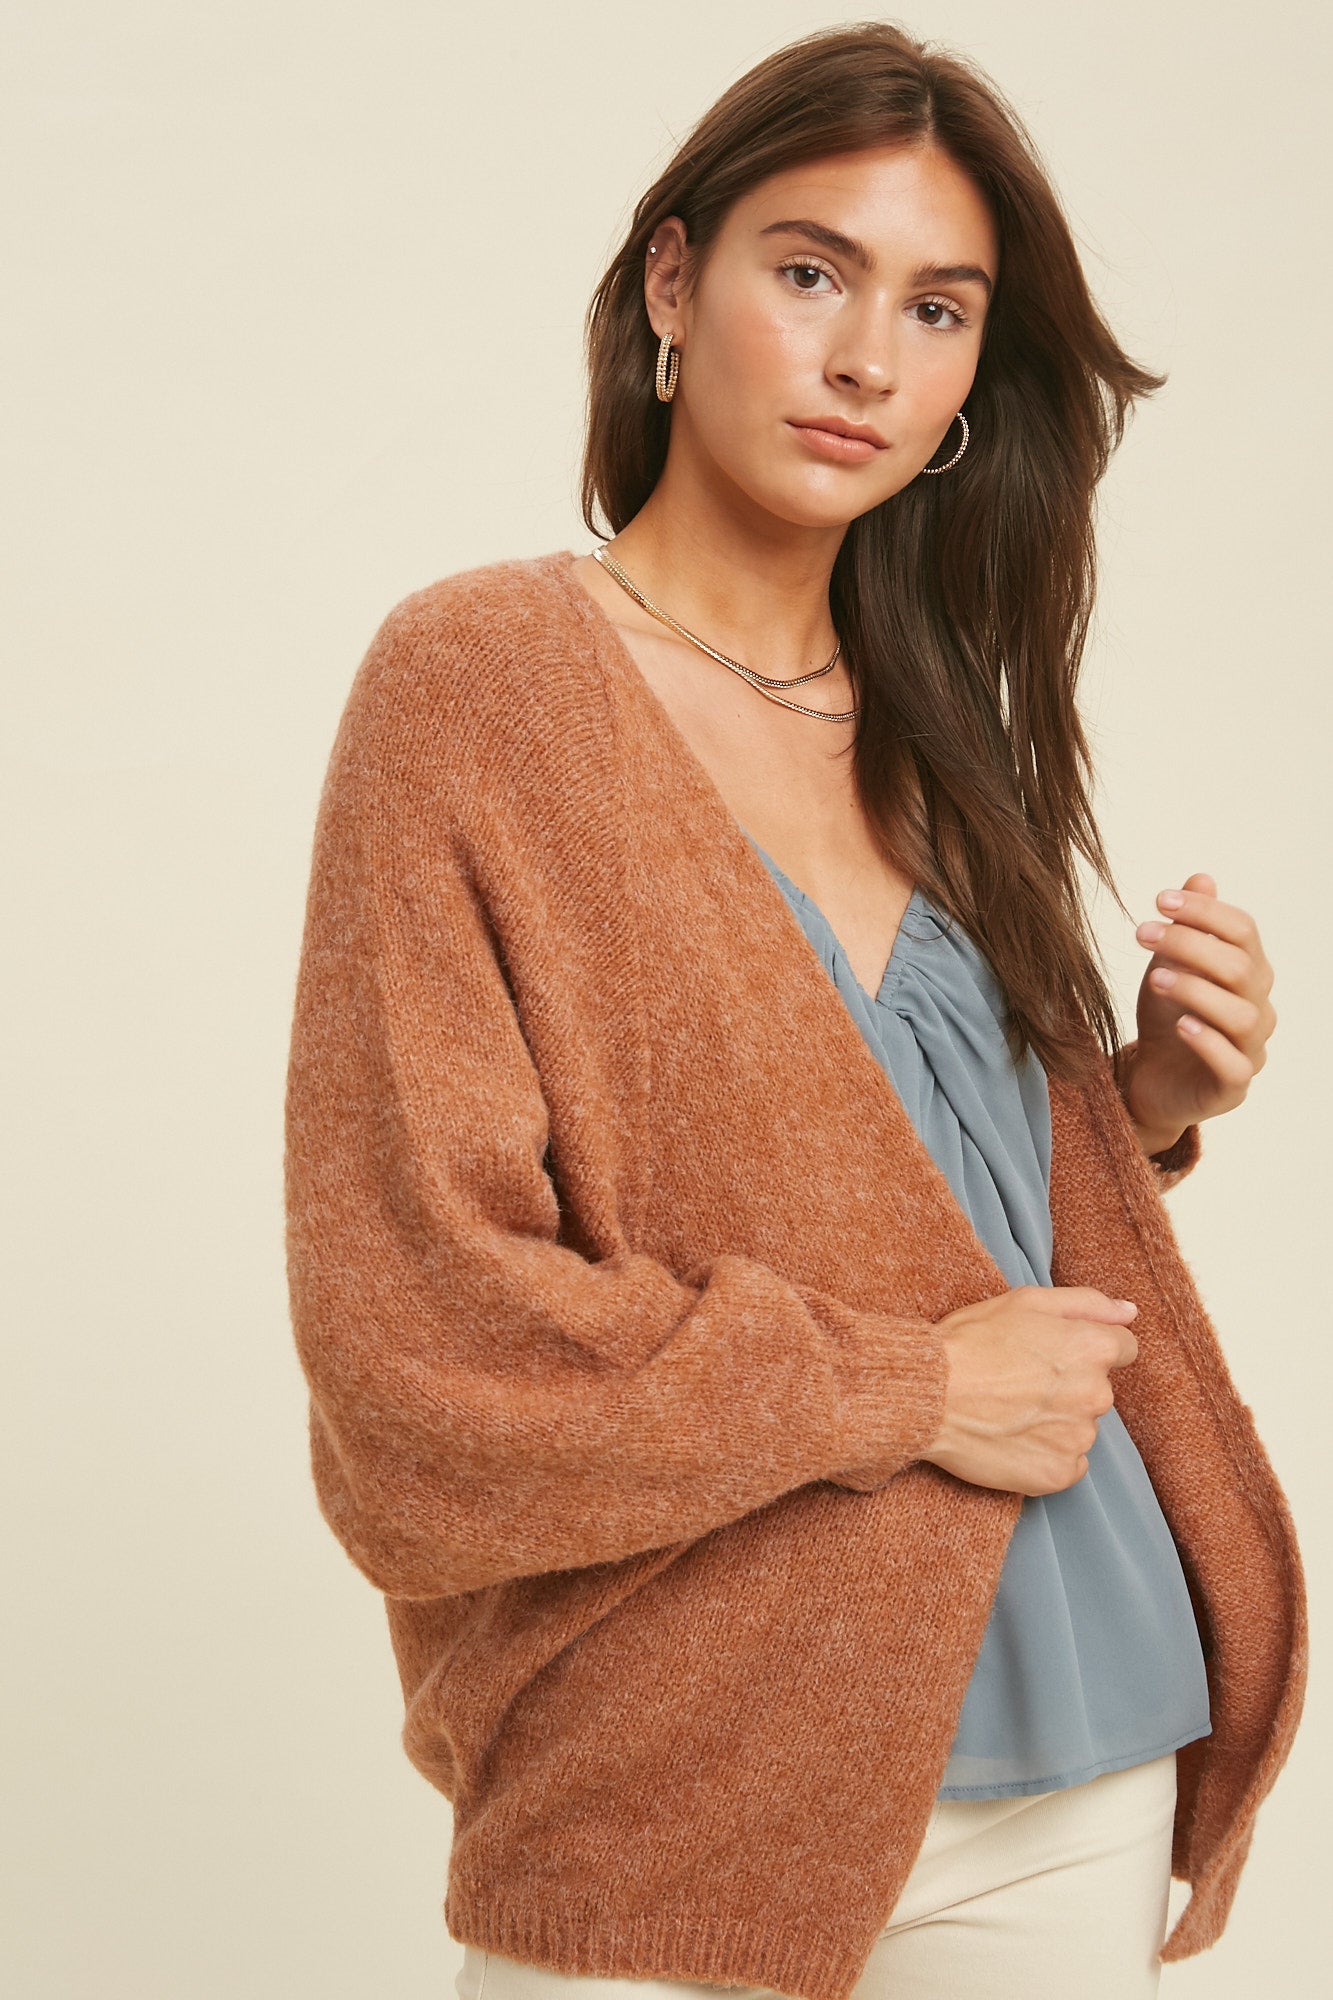 Brushed Knit Open Front Cardigan by Wishlist.